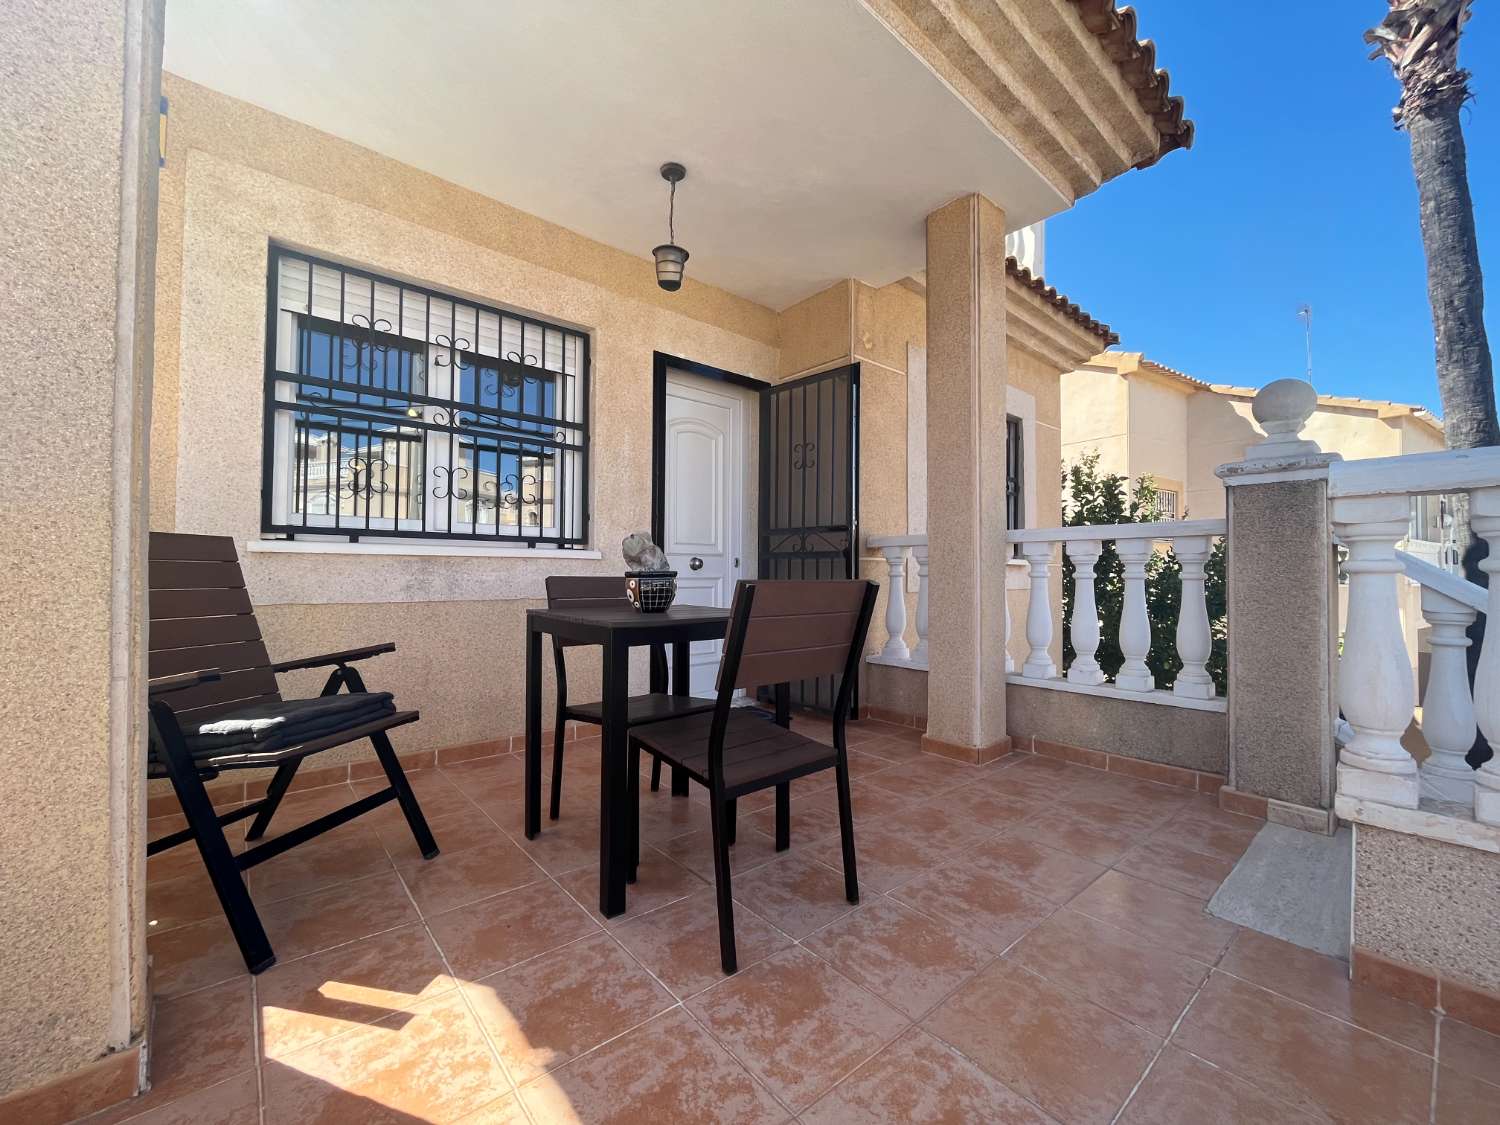 Beautiful detached villa with 4 bedrooms and 3 bathrooms with private pool